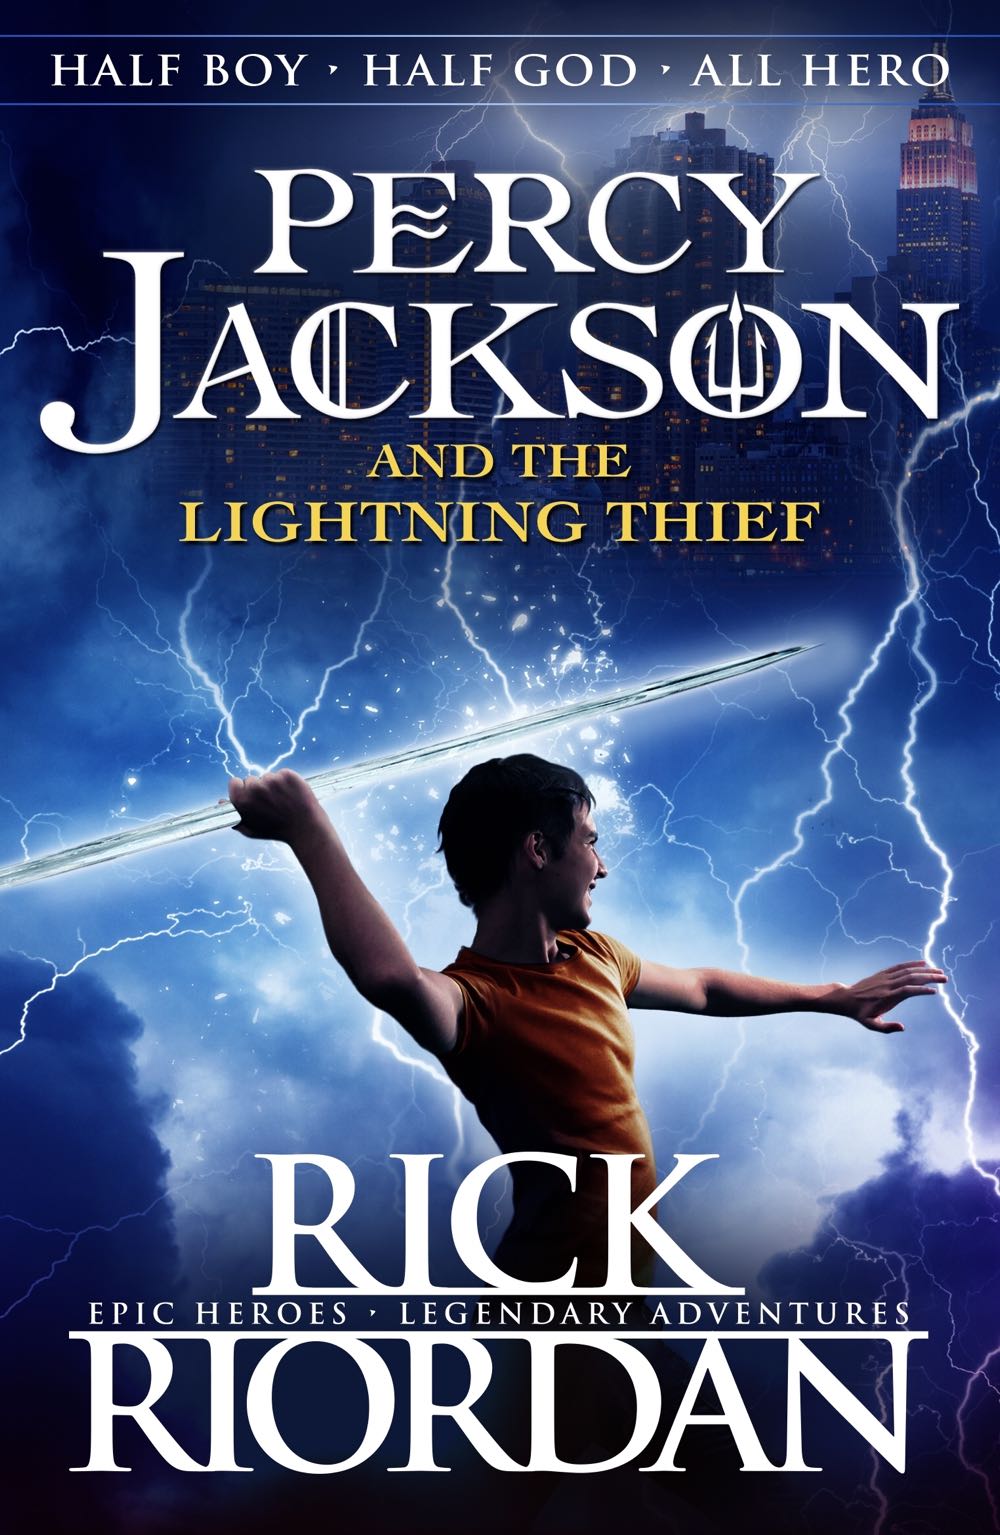 1 The Lightning Thief Percy Jackson and the Olympians - Rick Riordan (Hyperion Books for Children - Paperback) book collectible [Barcode 9780786838653] - Main Image 3